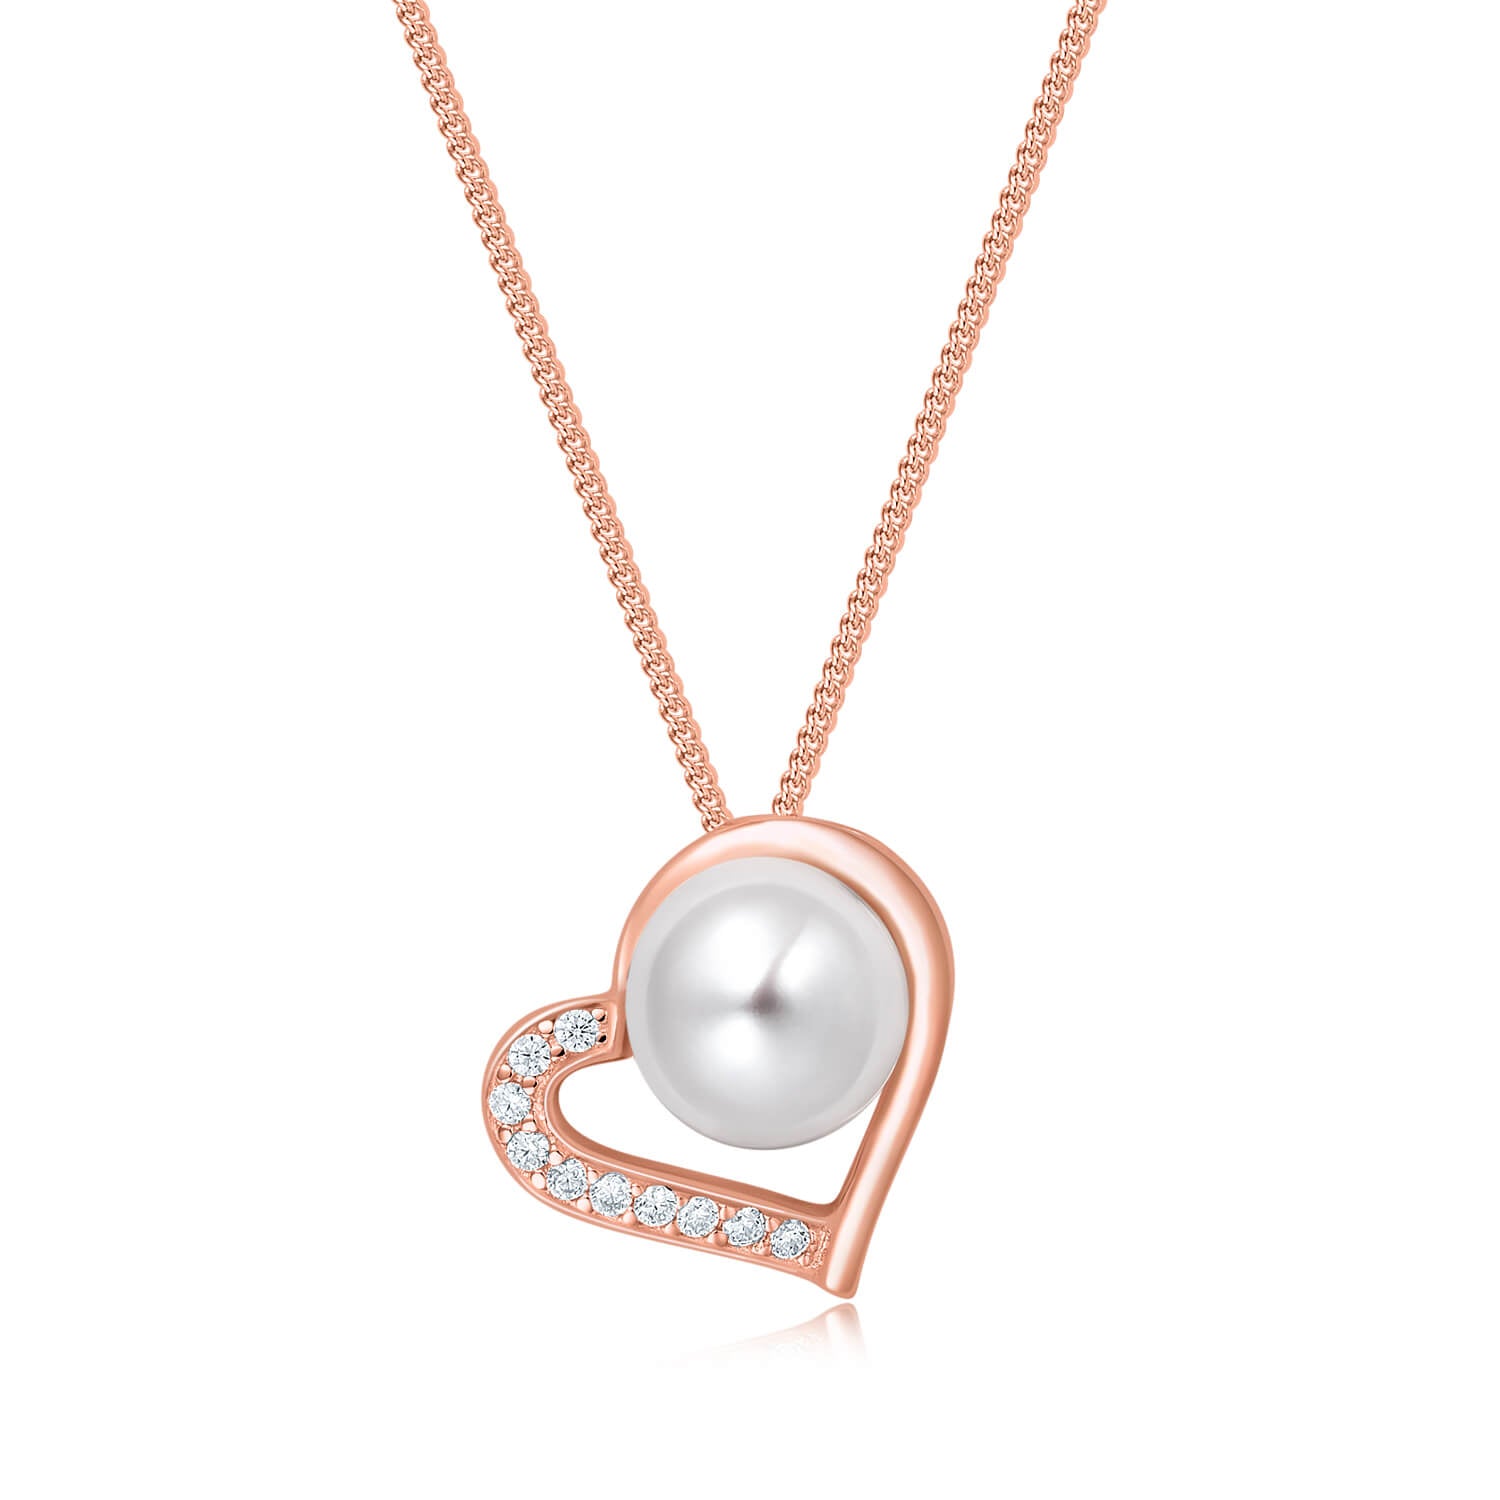 Molah Rose Gold Plated 925 Silver Cultured Freshwater Pearl and CZ Pendant Necklace